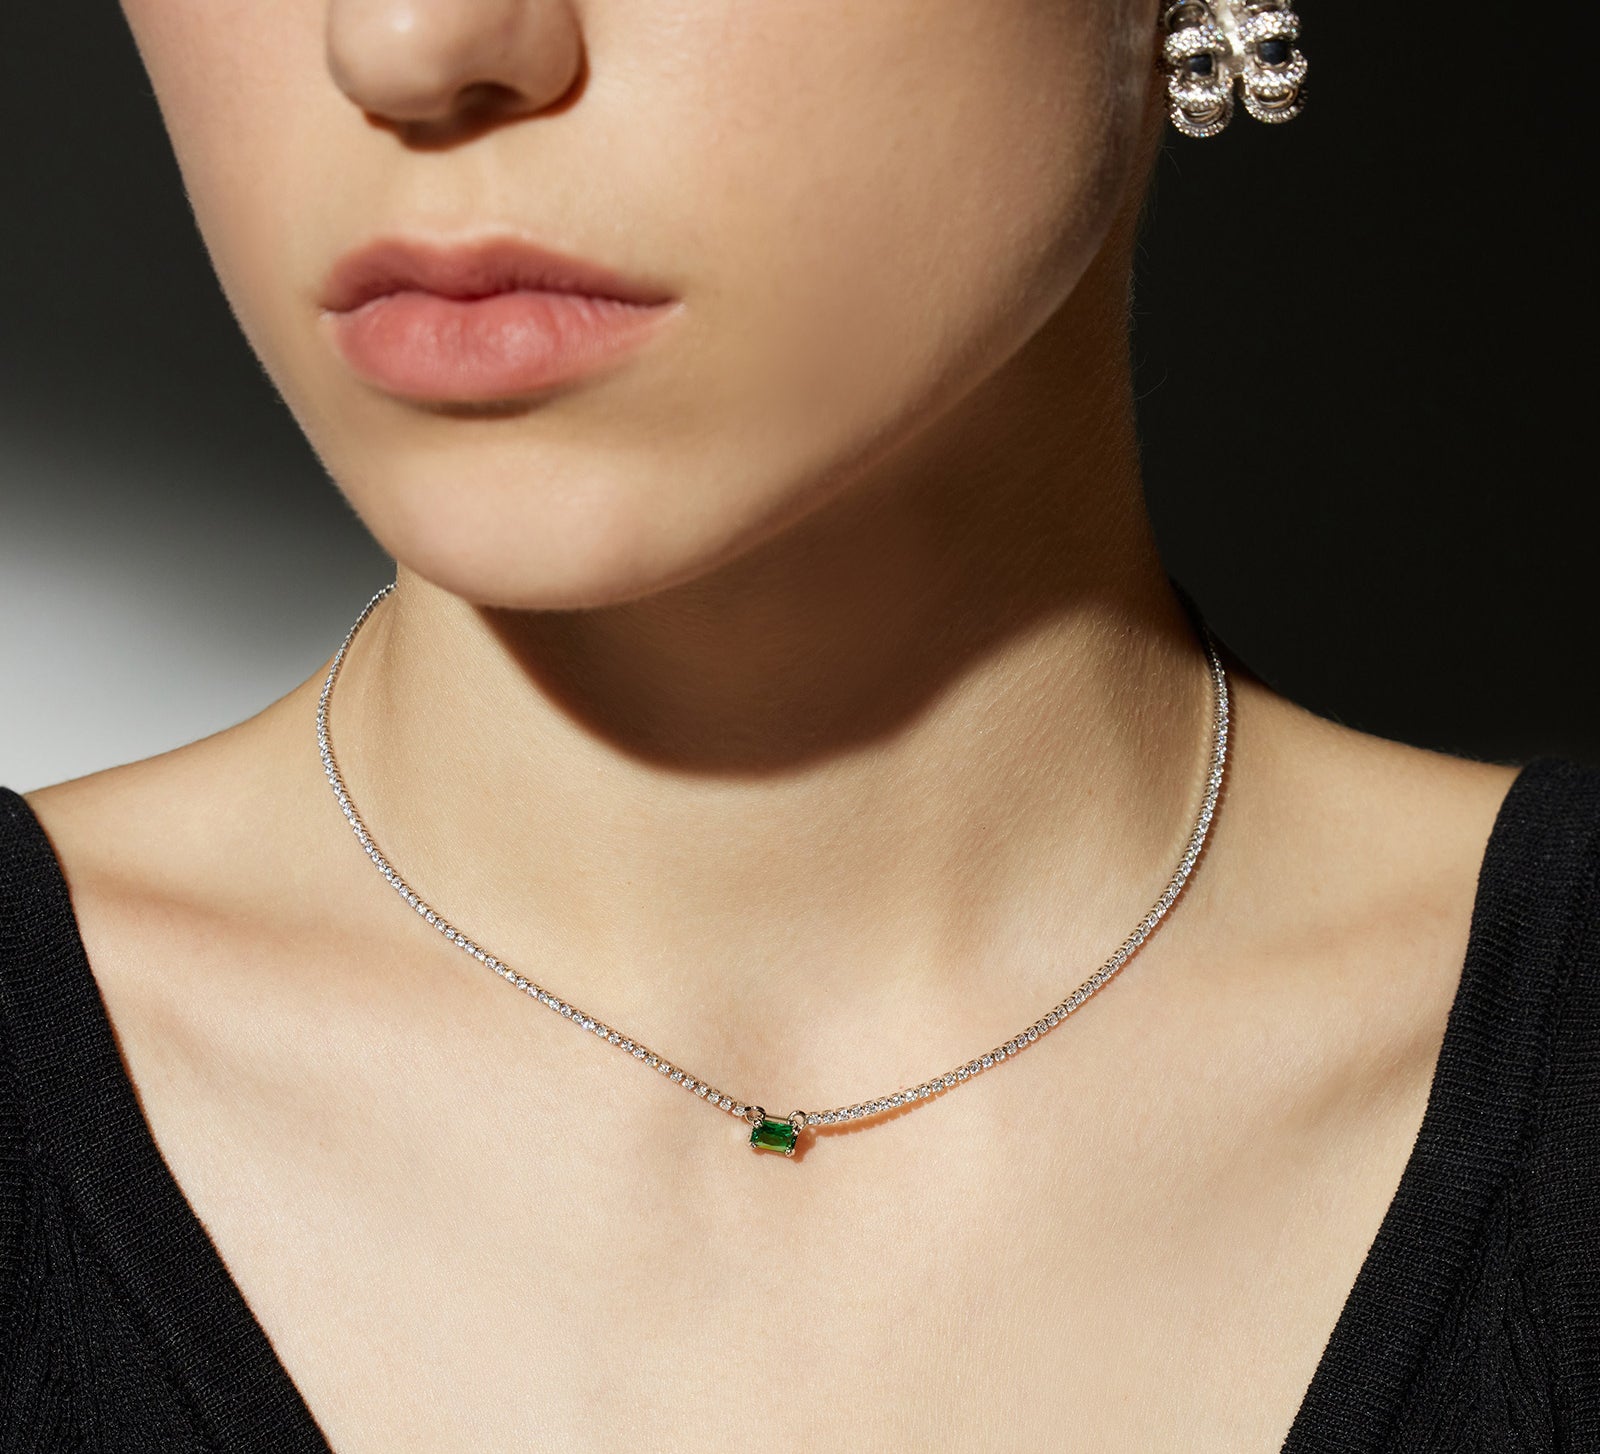 Emerald Rectangle Dewdrop Necklace, making a vivid green statement, this pendant showcases a stunning emerald rectangle dewdrop suspended from a delicate chain, adding a pop of color and modernity to your ensemble